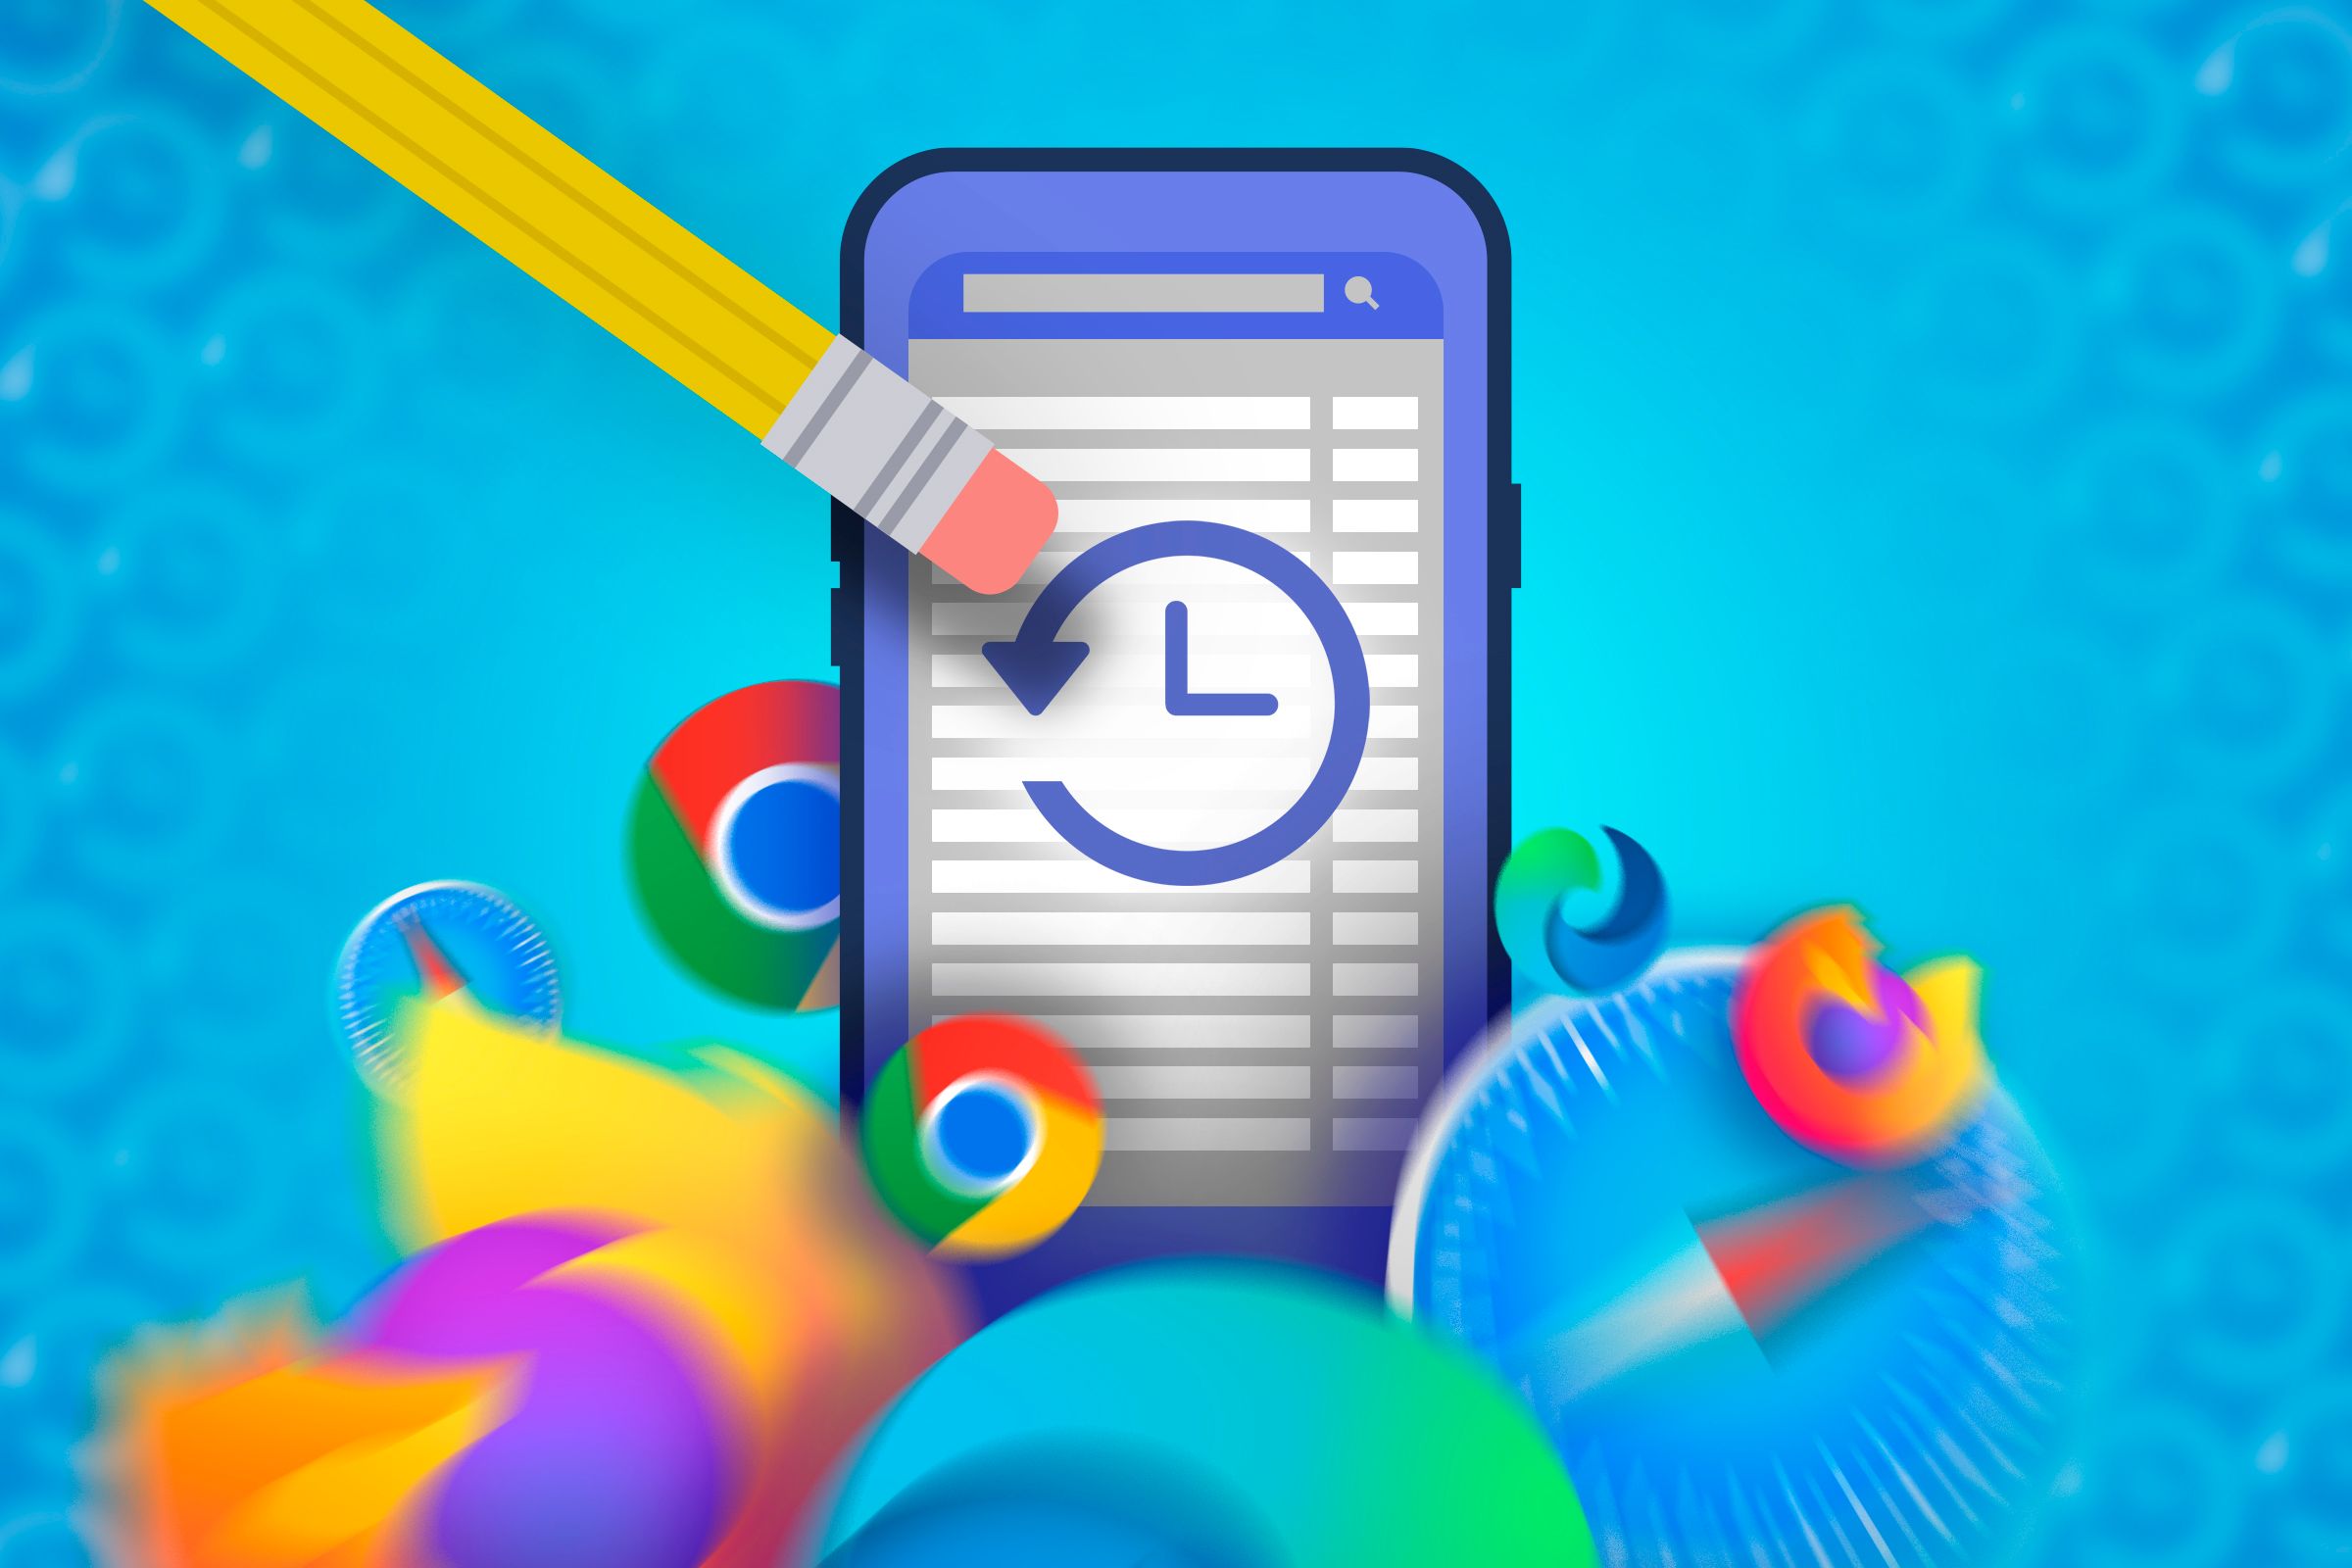 Illustration of a pencil erasing the browser history on a phone and several browser icons.